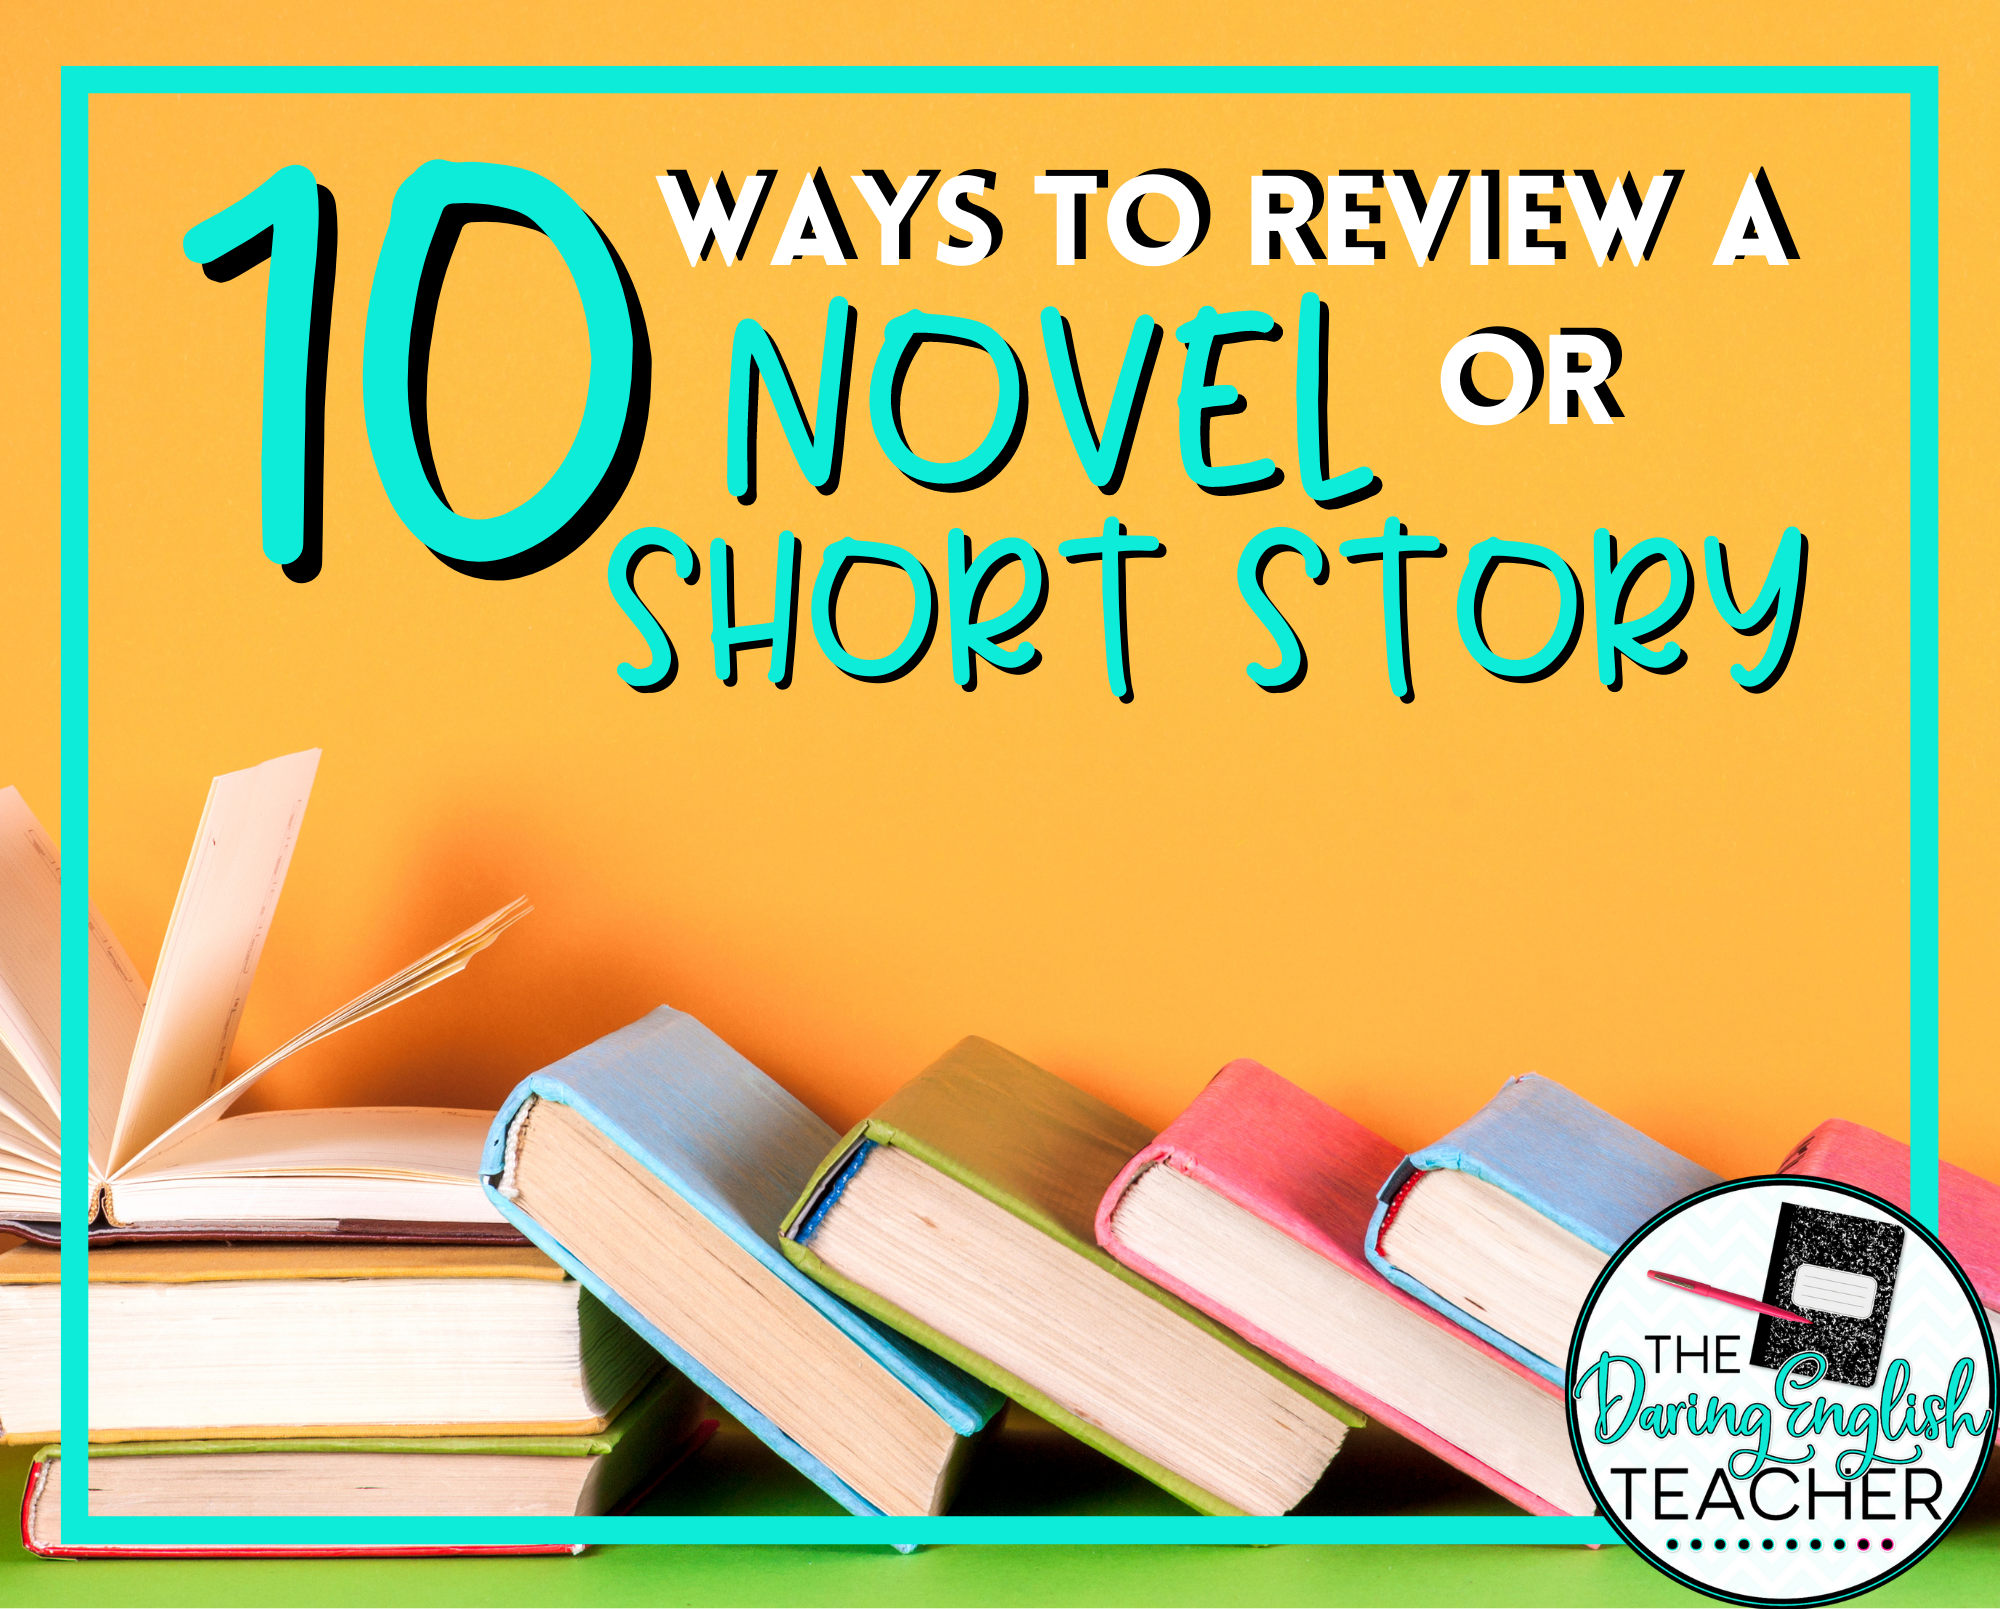 10 Ways to Review a Novel or Short Story